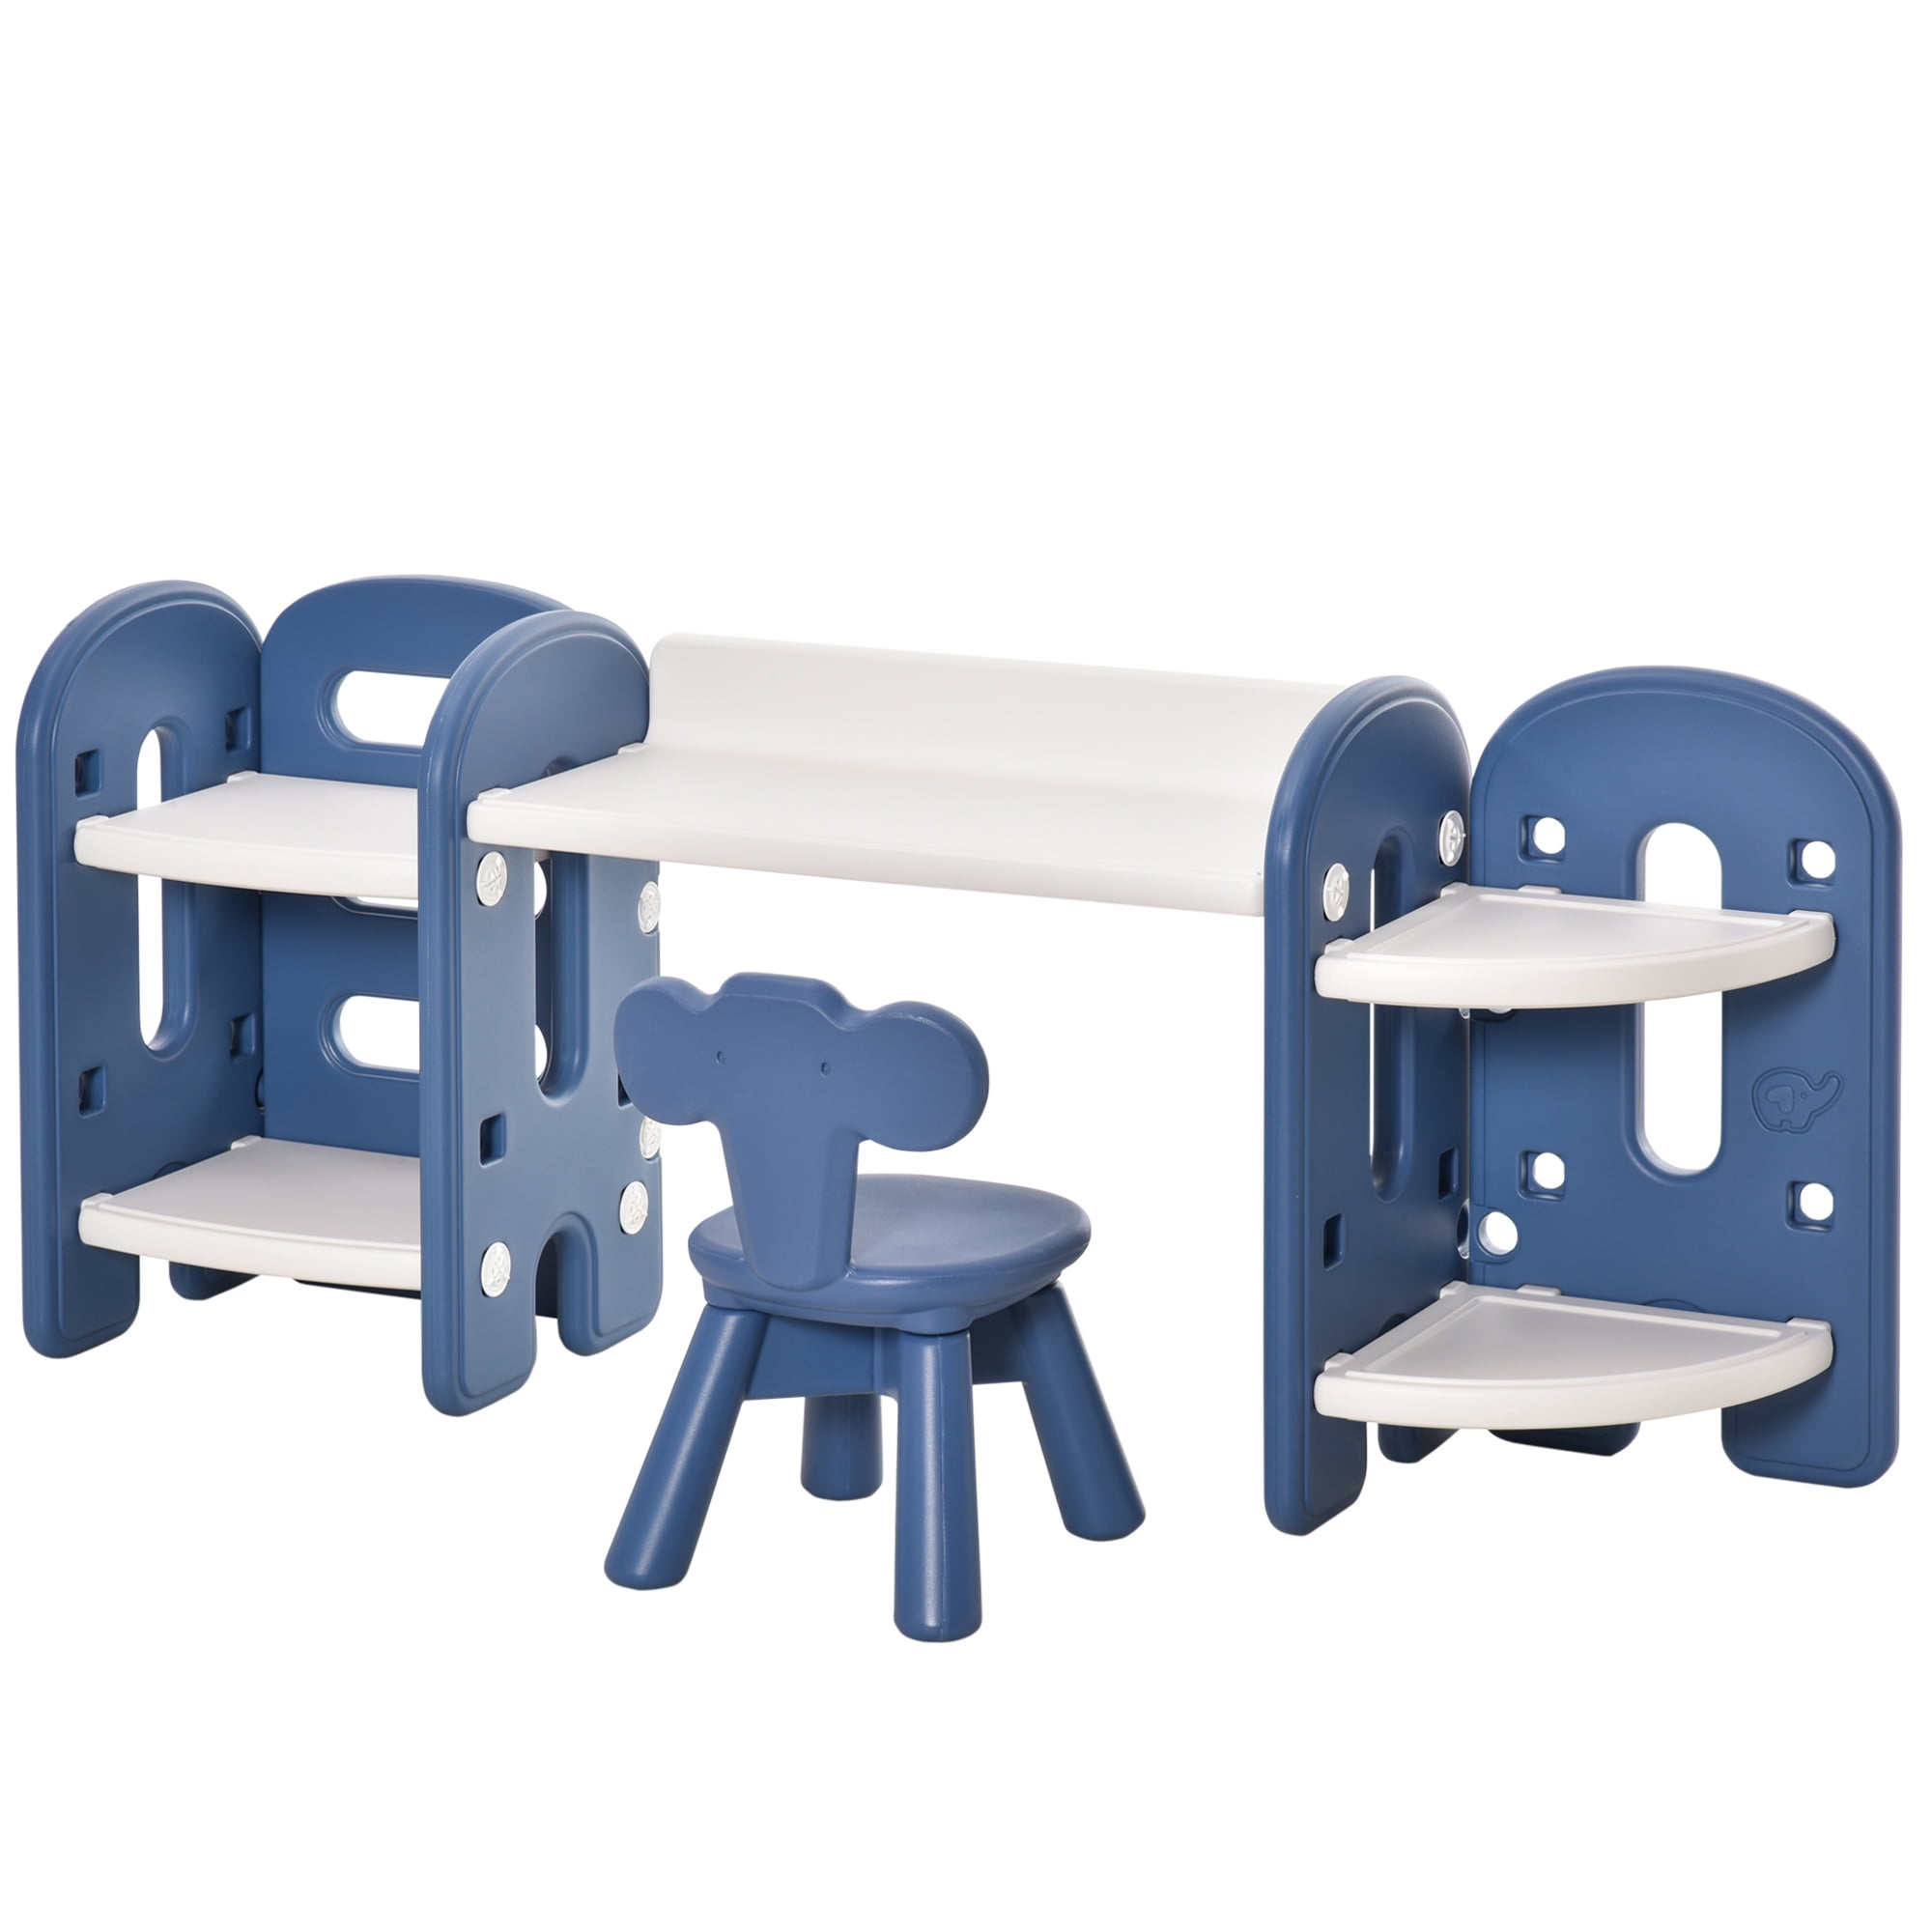 Qaba 3-in-1 Kids Activity Table and Chairs Set with 3 Surfaces